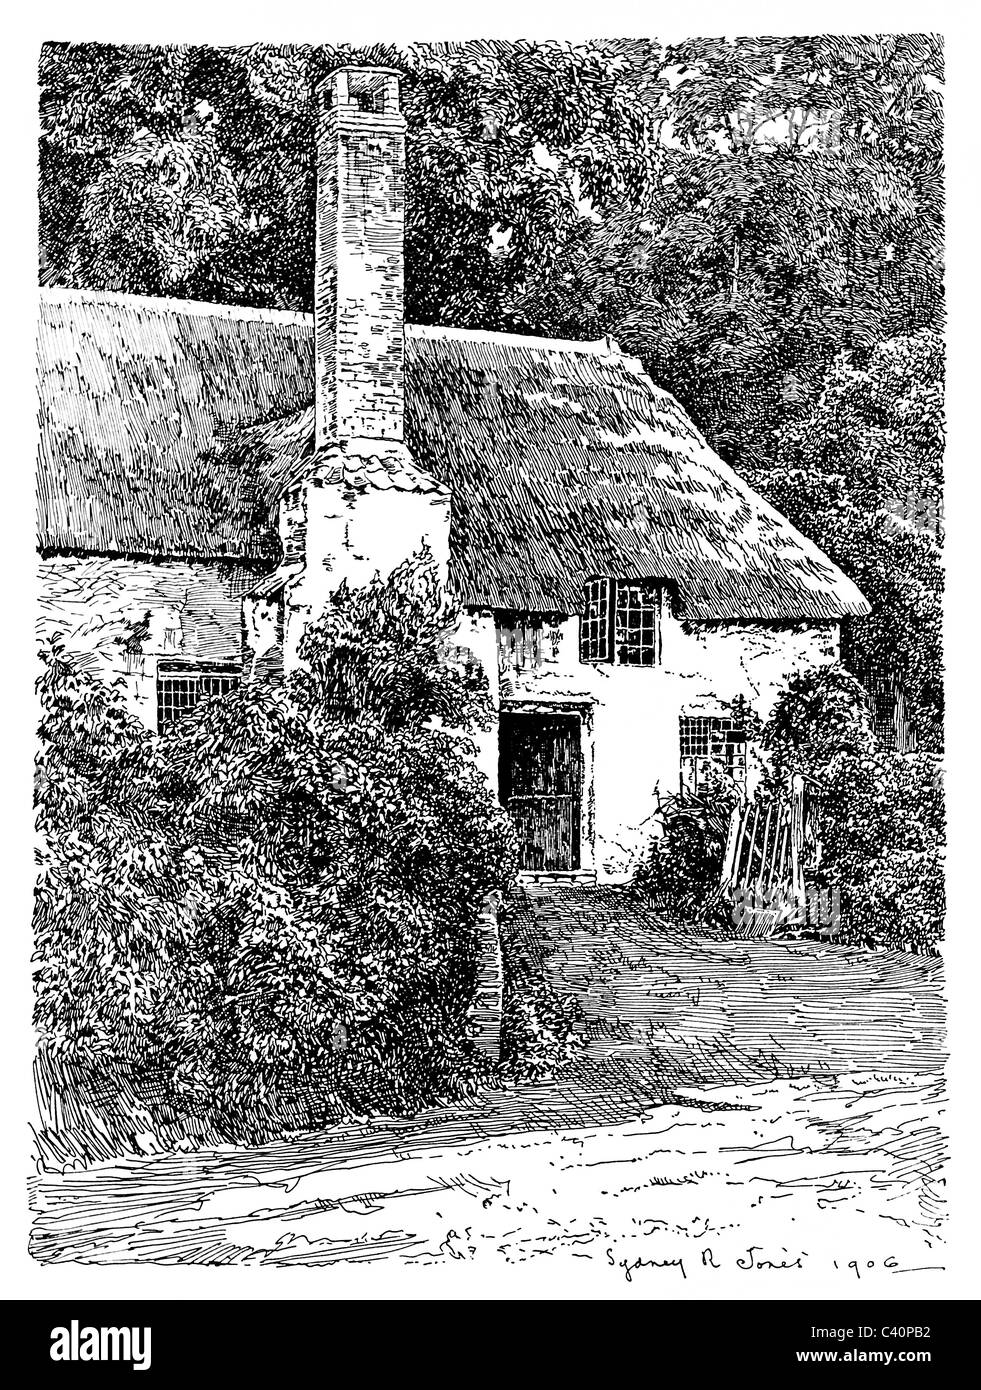 Minehead, Somerset - pen and ink illustration from 'Old English Country Cottages' by Charles Holme, 1906. Stock Photo